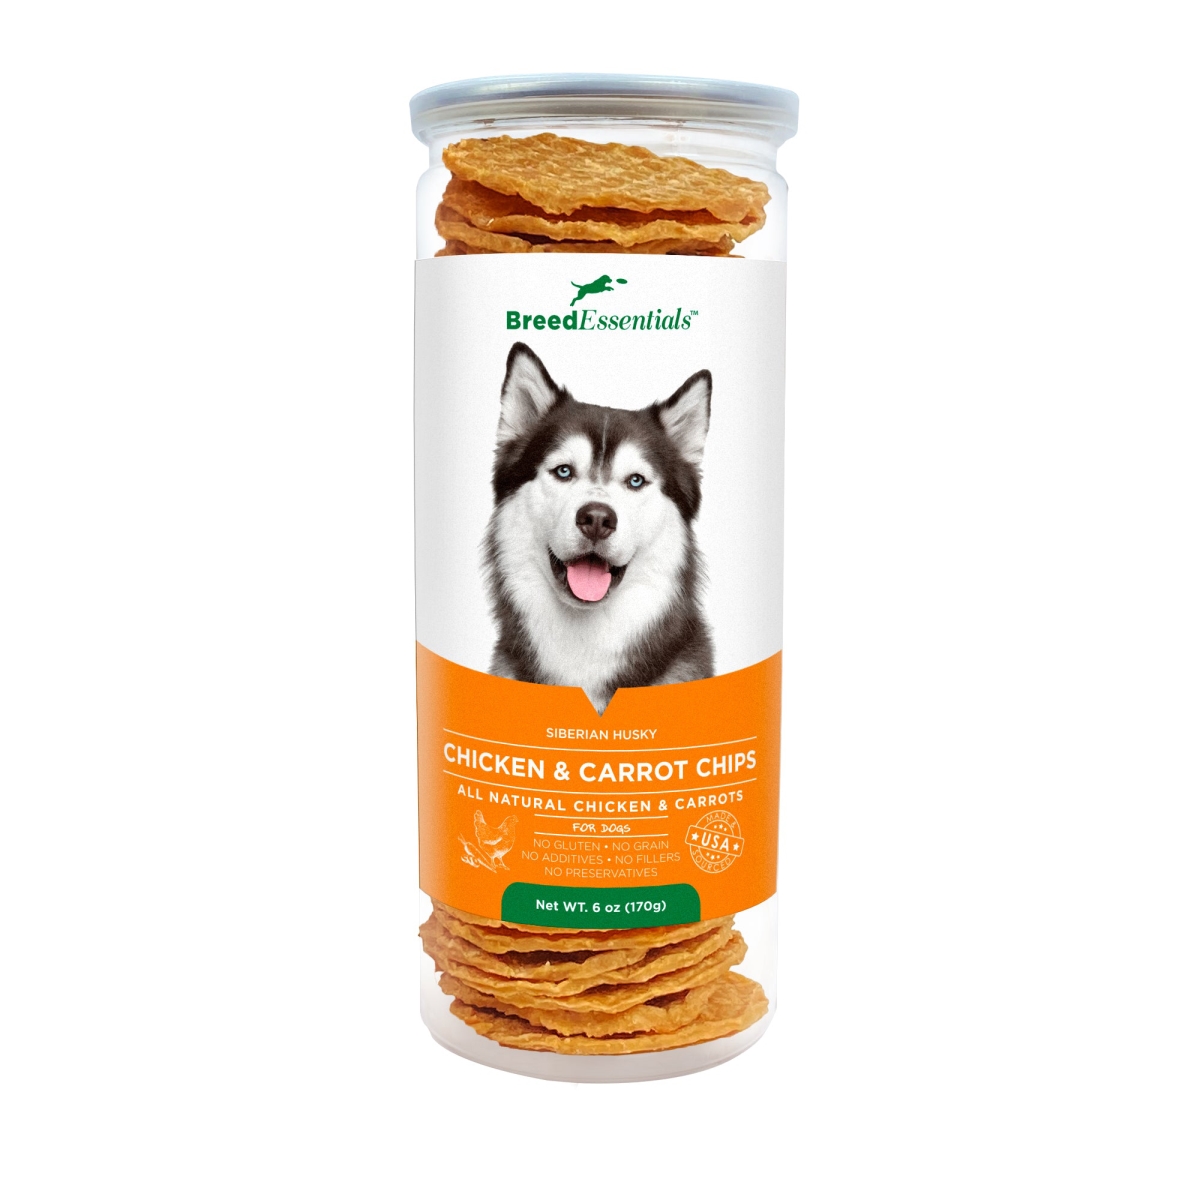 Picture of Breed Essentials 197247000631 6 oz Chicken & Carrot Chips - Siberian Husky